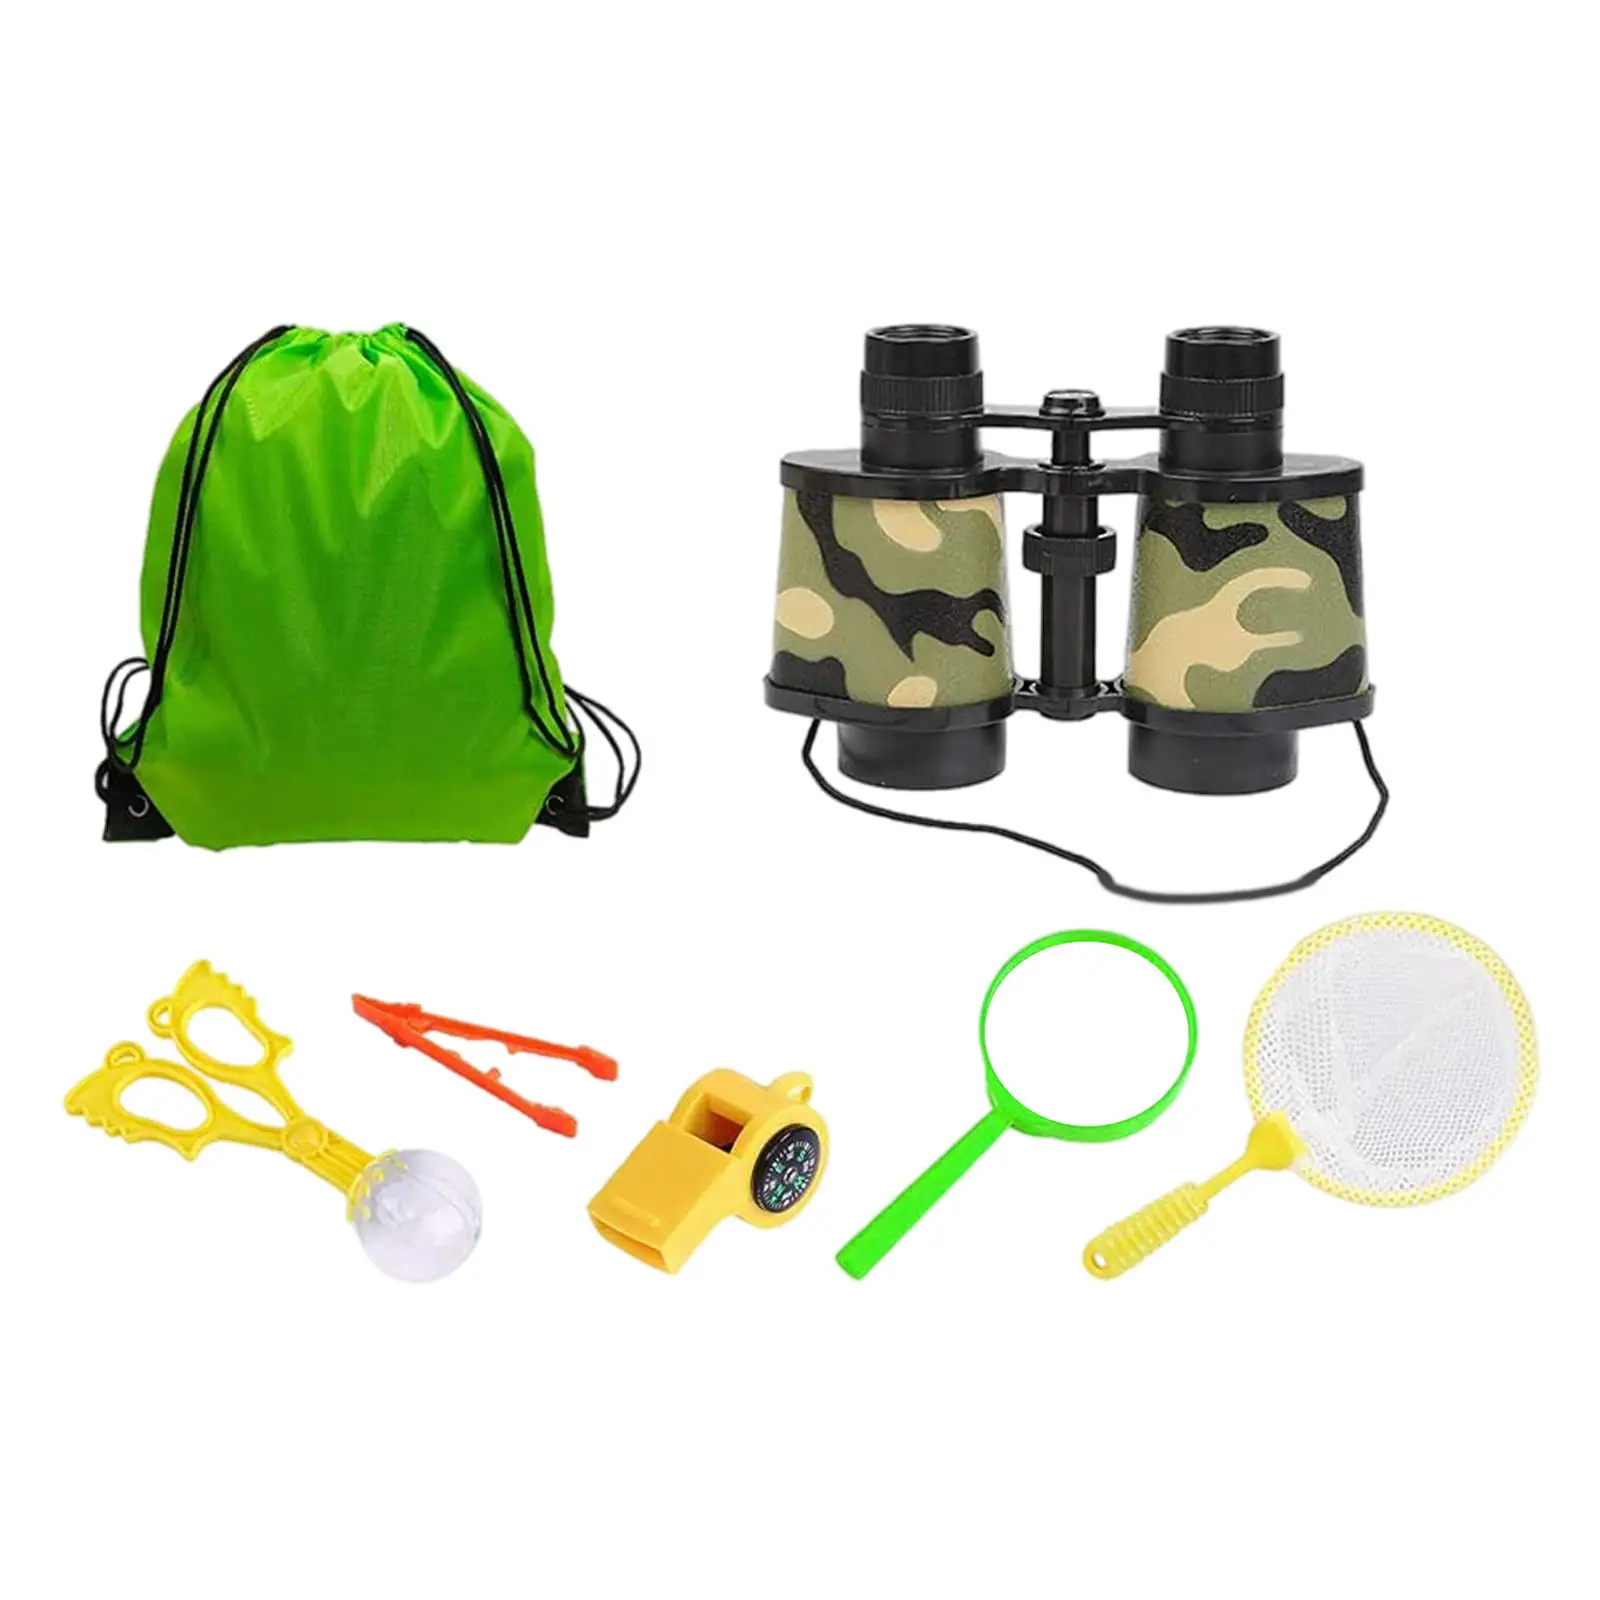 Bug Catcher Fishing Compass 23 Pcs Nature Exploration Kit for Children Outdoor Hiking Educational Games Toy with Mini Binoculars Kalawen Outdoor Explorer Set Magnifying Glass Adventure Whistle 